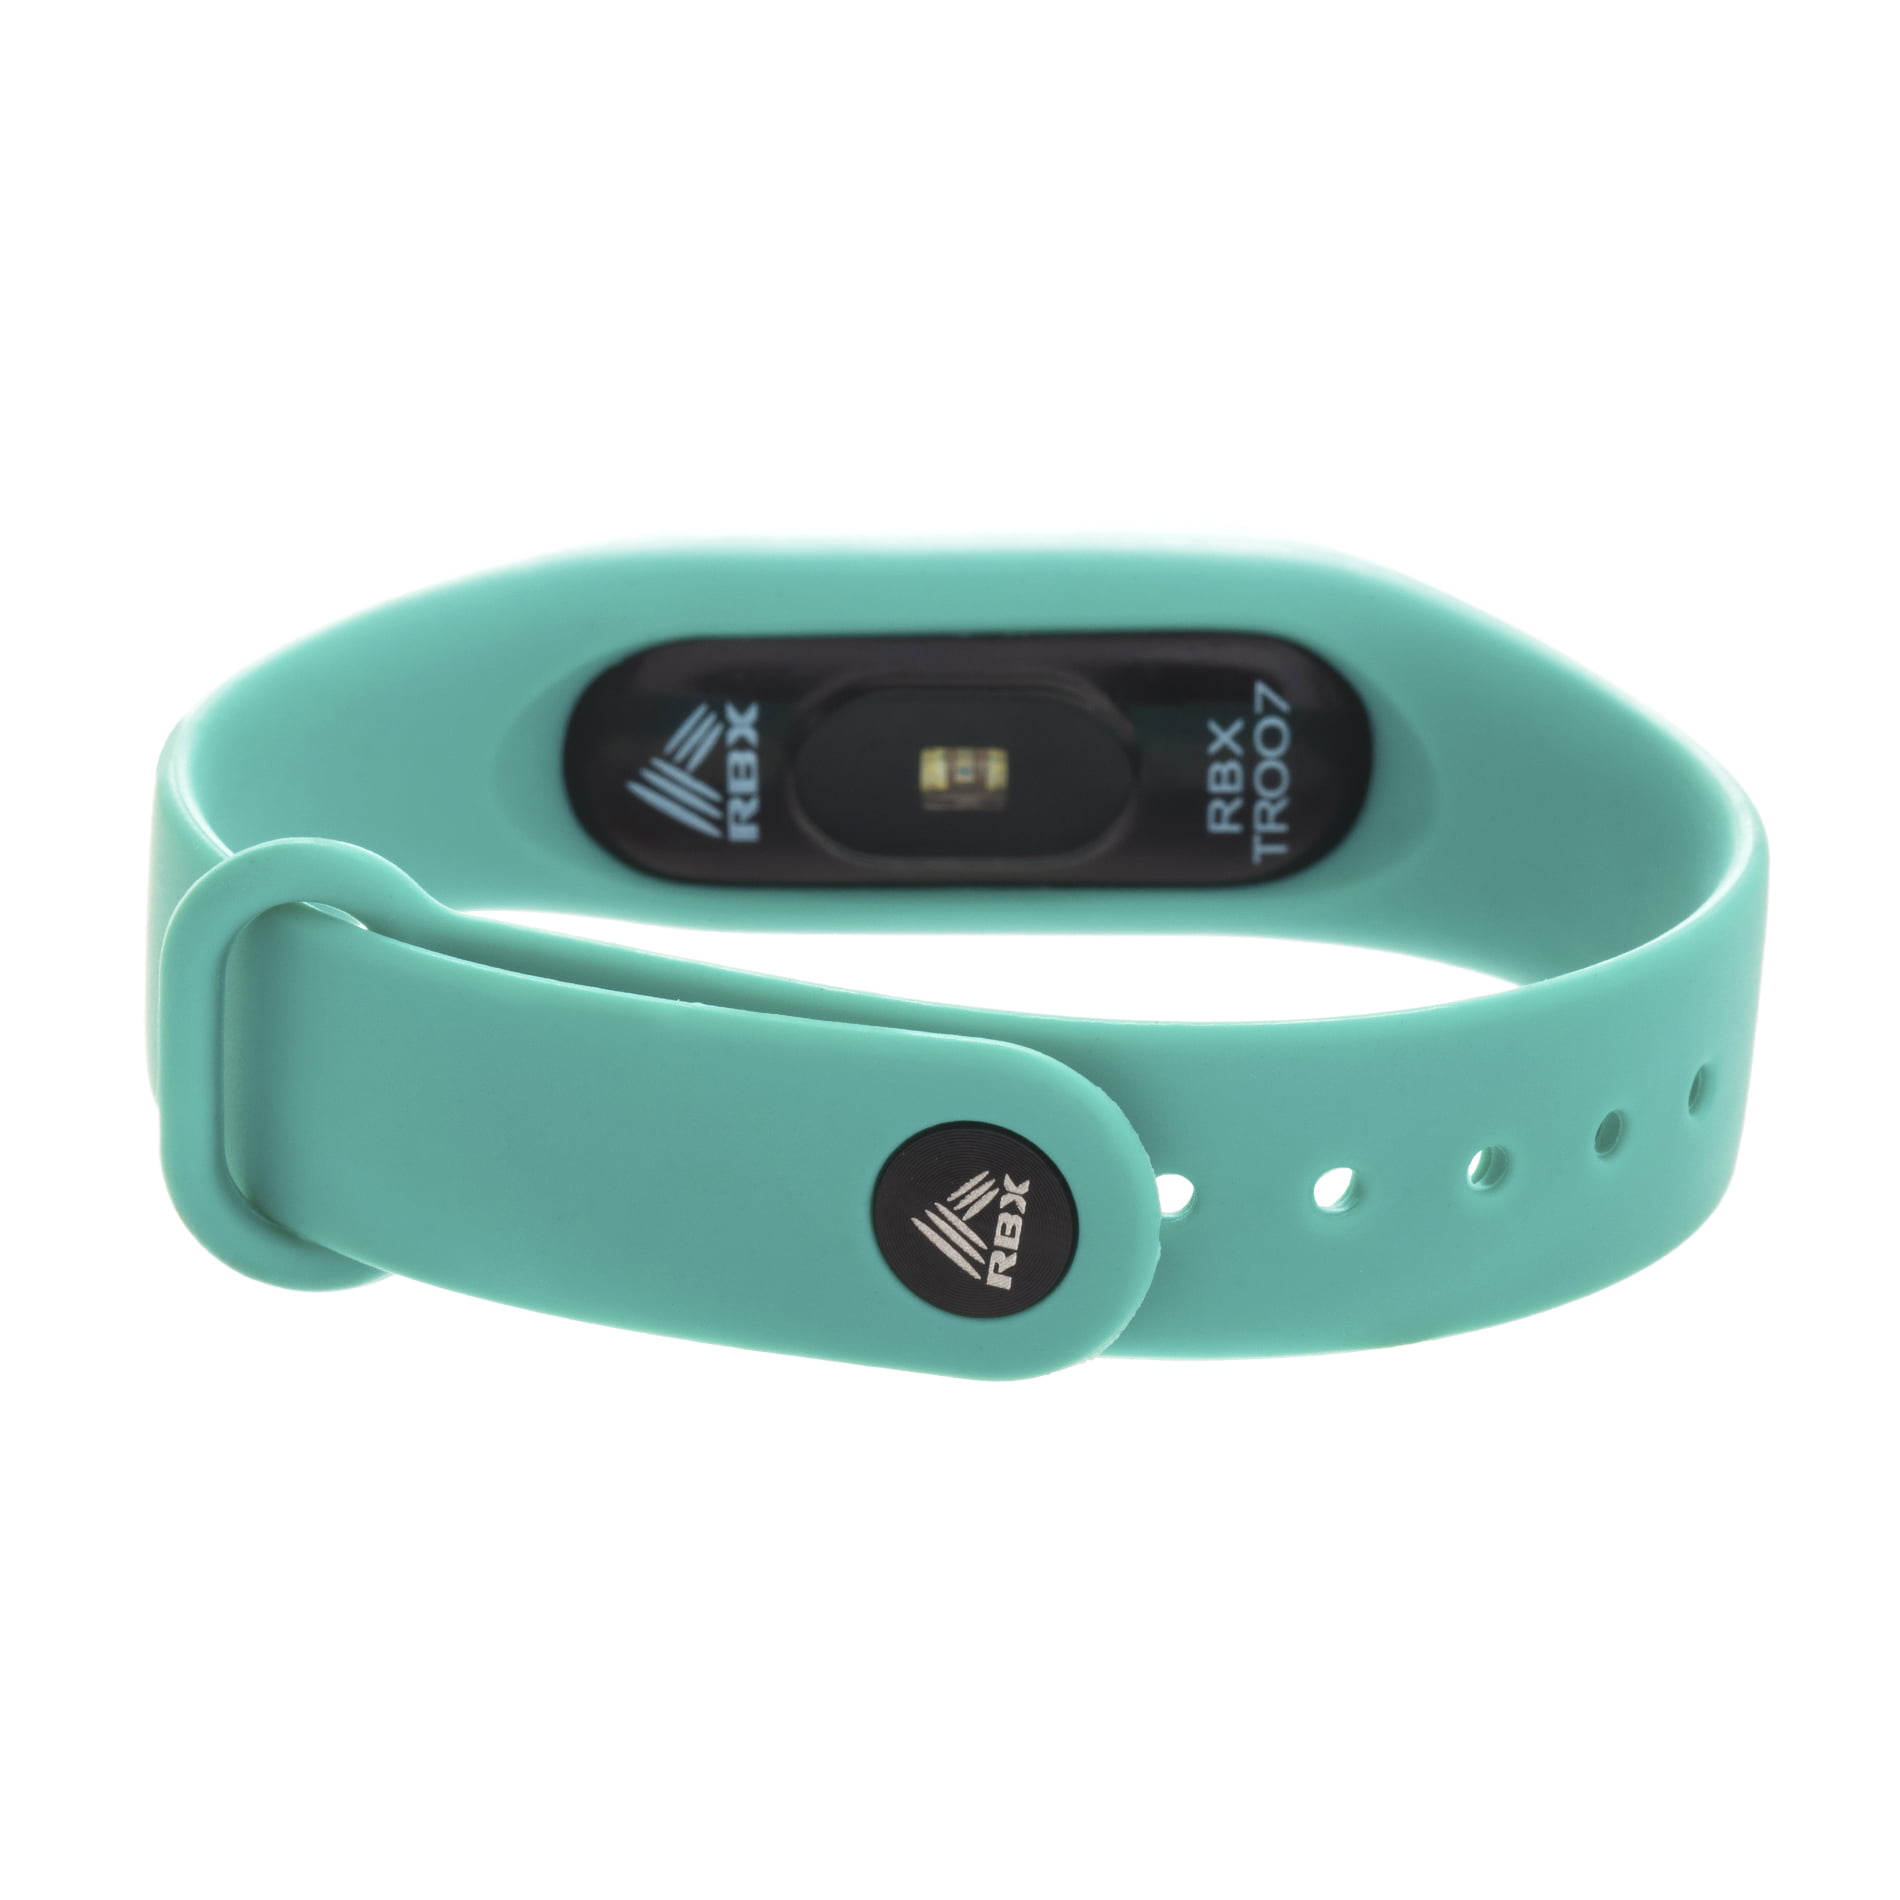 TR7 Activity Monitor Tracker and Rate RBX Heart